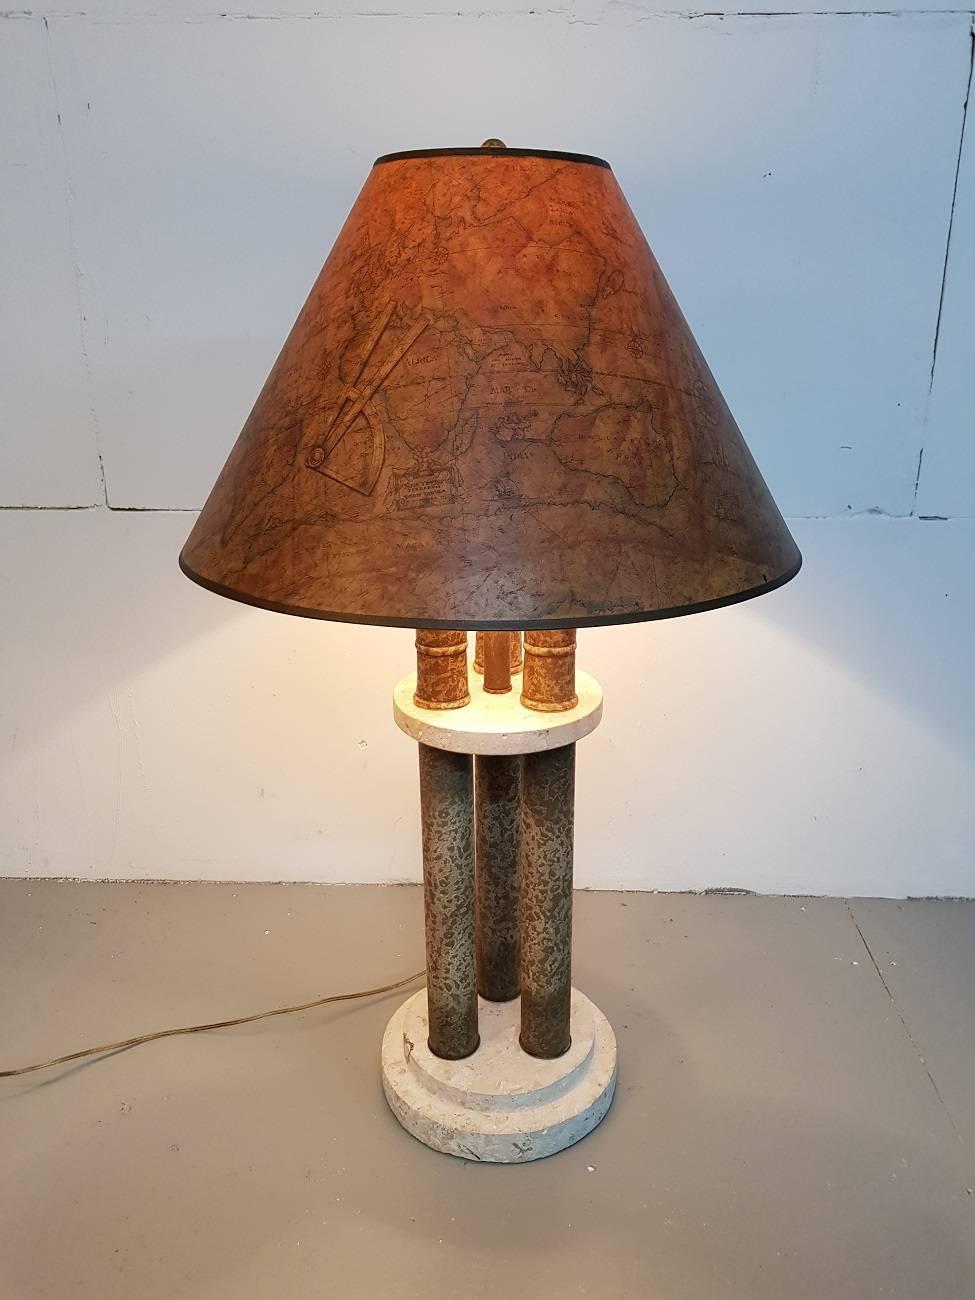 Beautiful but large table lamp from the 20th-21st century with influences from the Classical Roman and Egyptian antiquity and on the hood with a world map. The pillars are made of metal with a marble style painting with three lion heads the base is